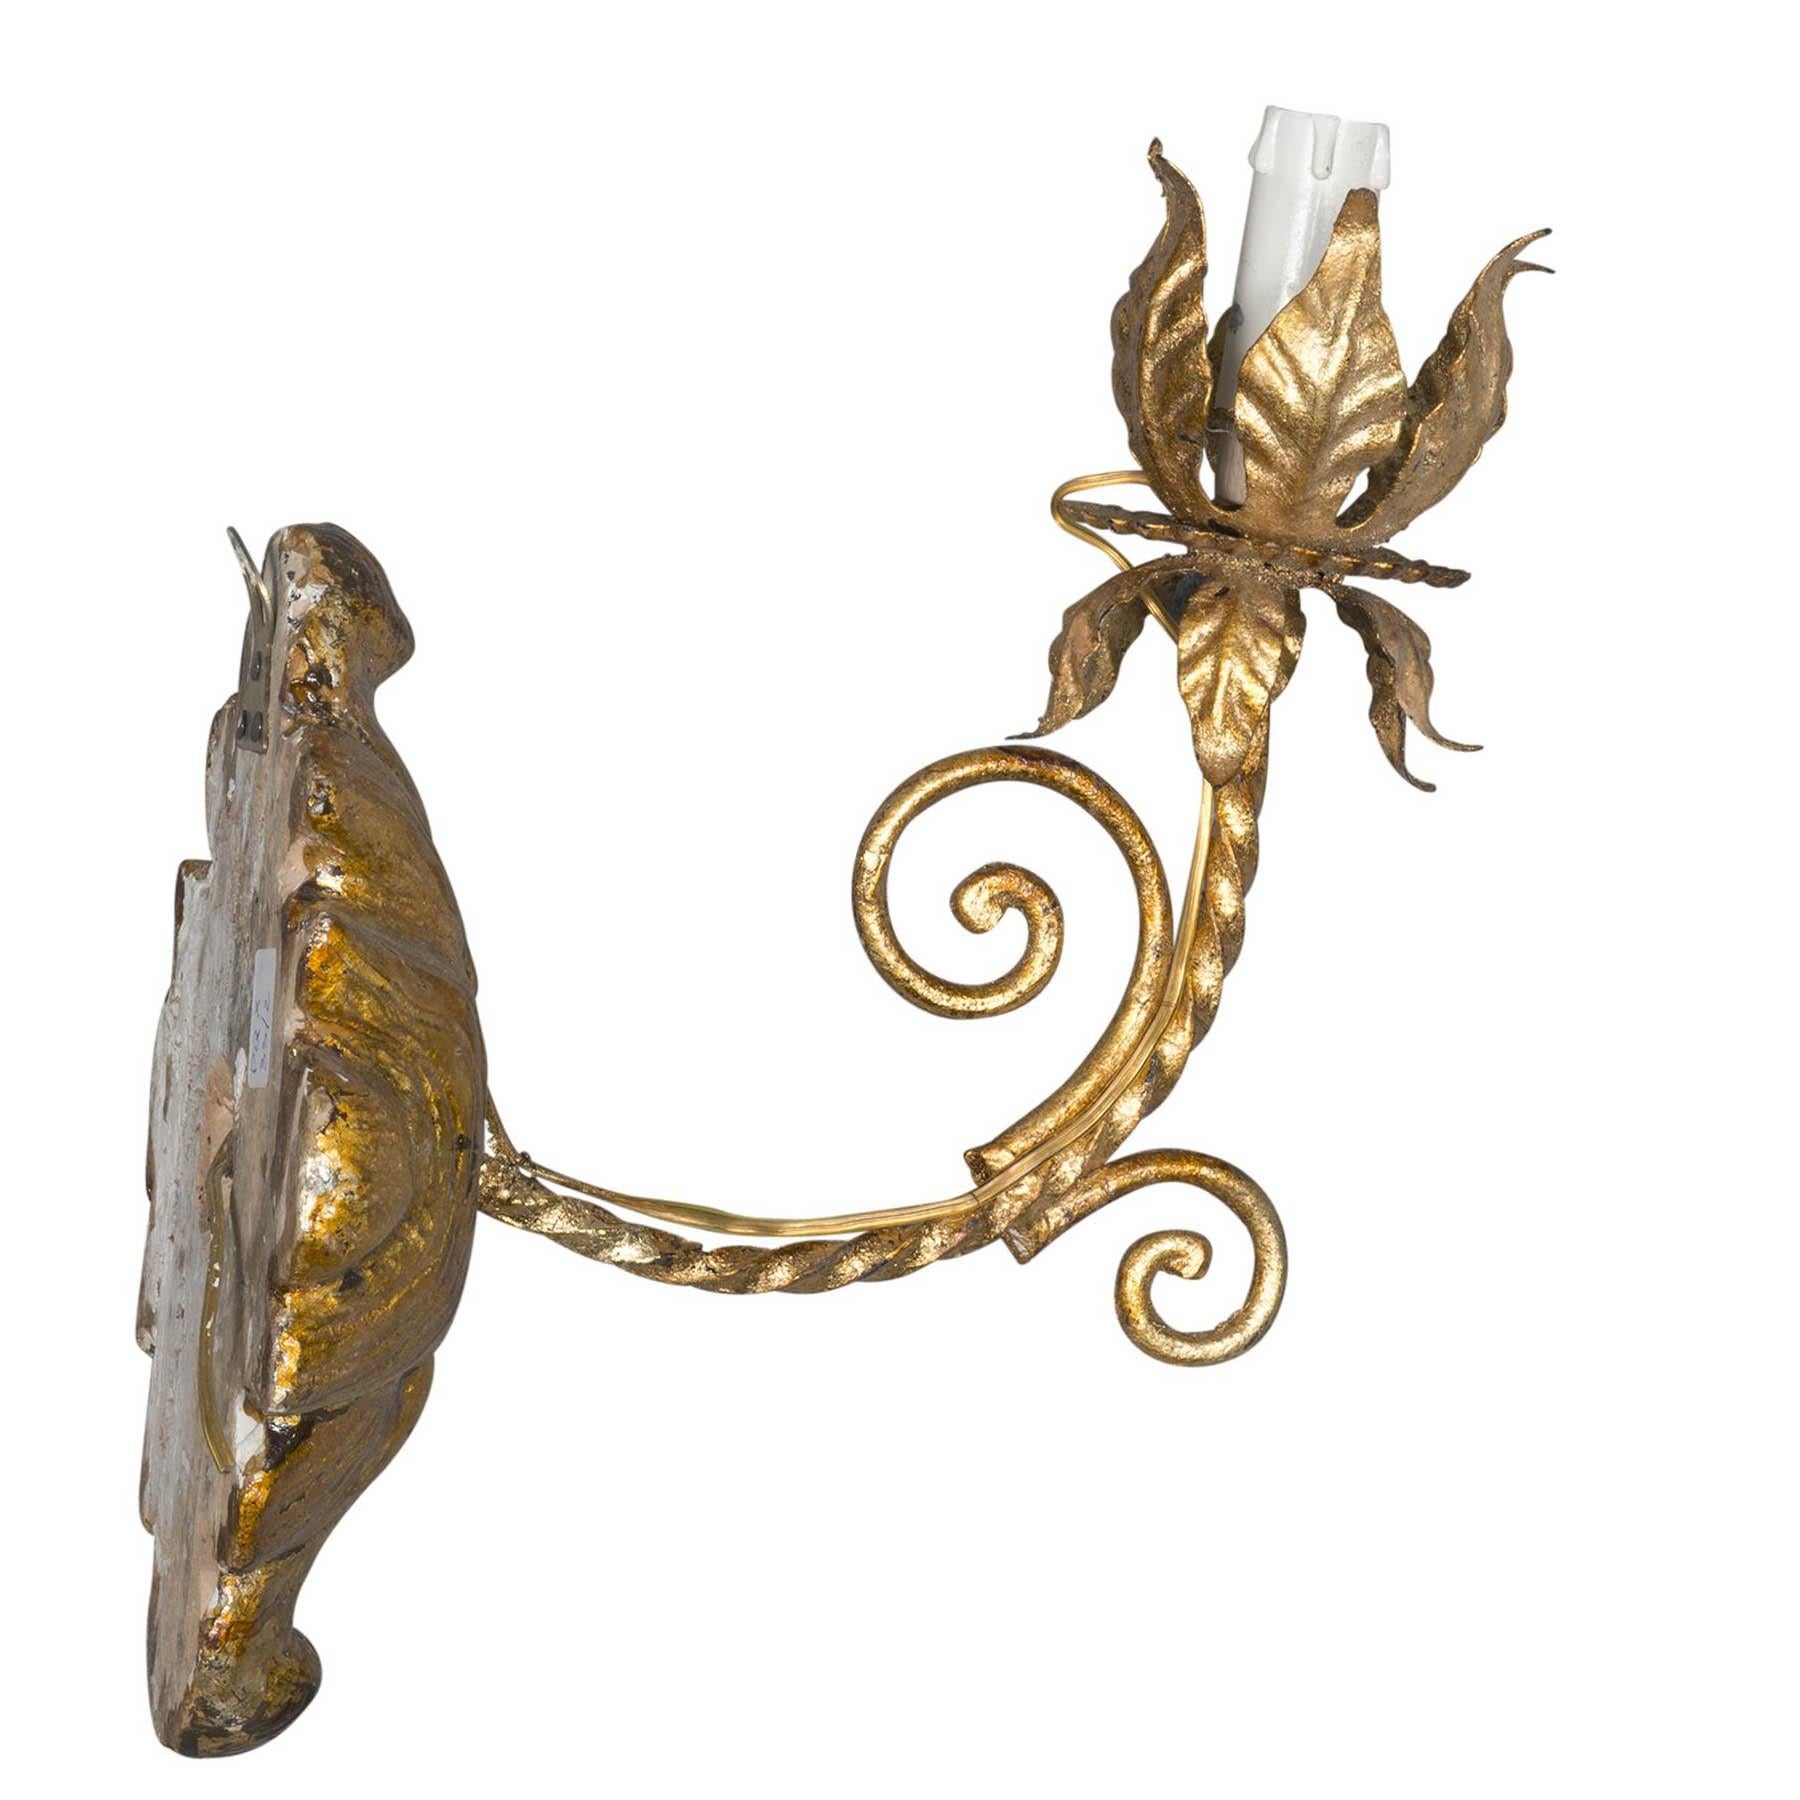 Anonymous
Late 19th century; Italy
Gilt wood and iron

Approximate size: 9.75 (h) x 6.75 (w) x 9 (d) inches

An elegant pair of gilt wood and iron wall sconces of probable late 19th century Italian origin. A leaf motif forms the wall mounts while